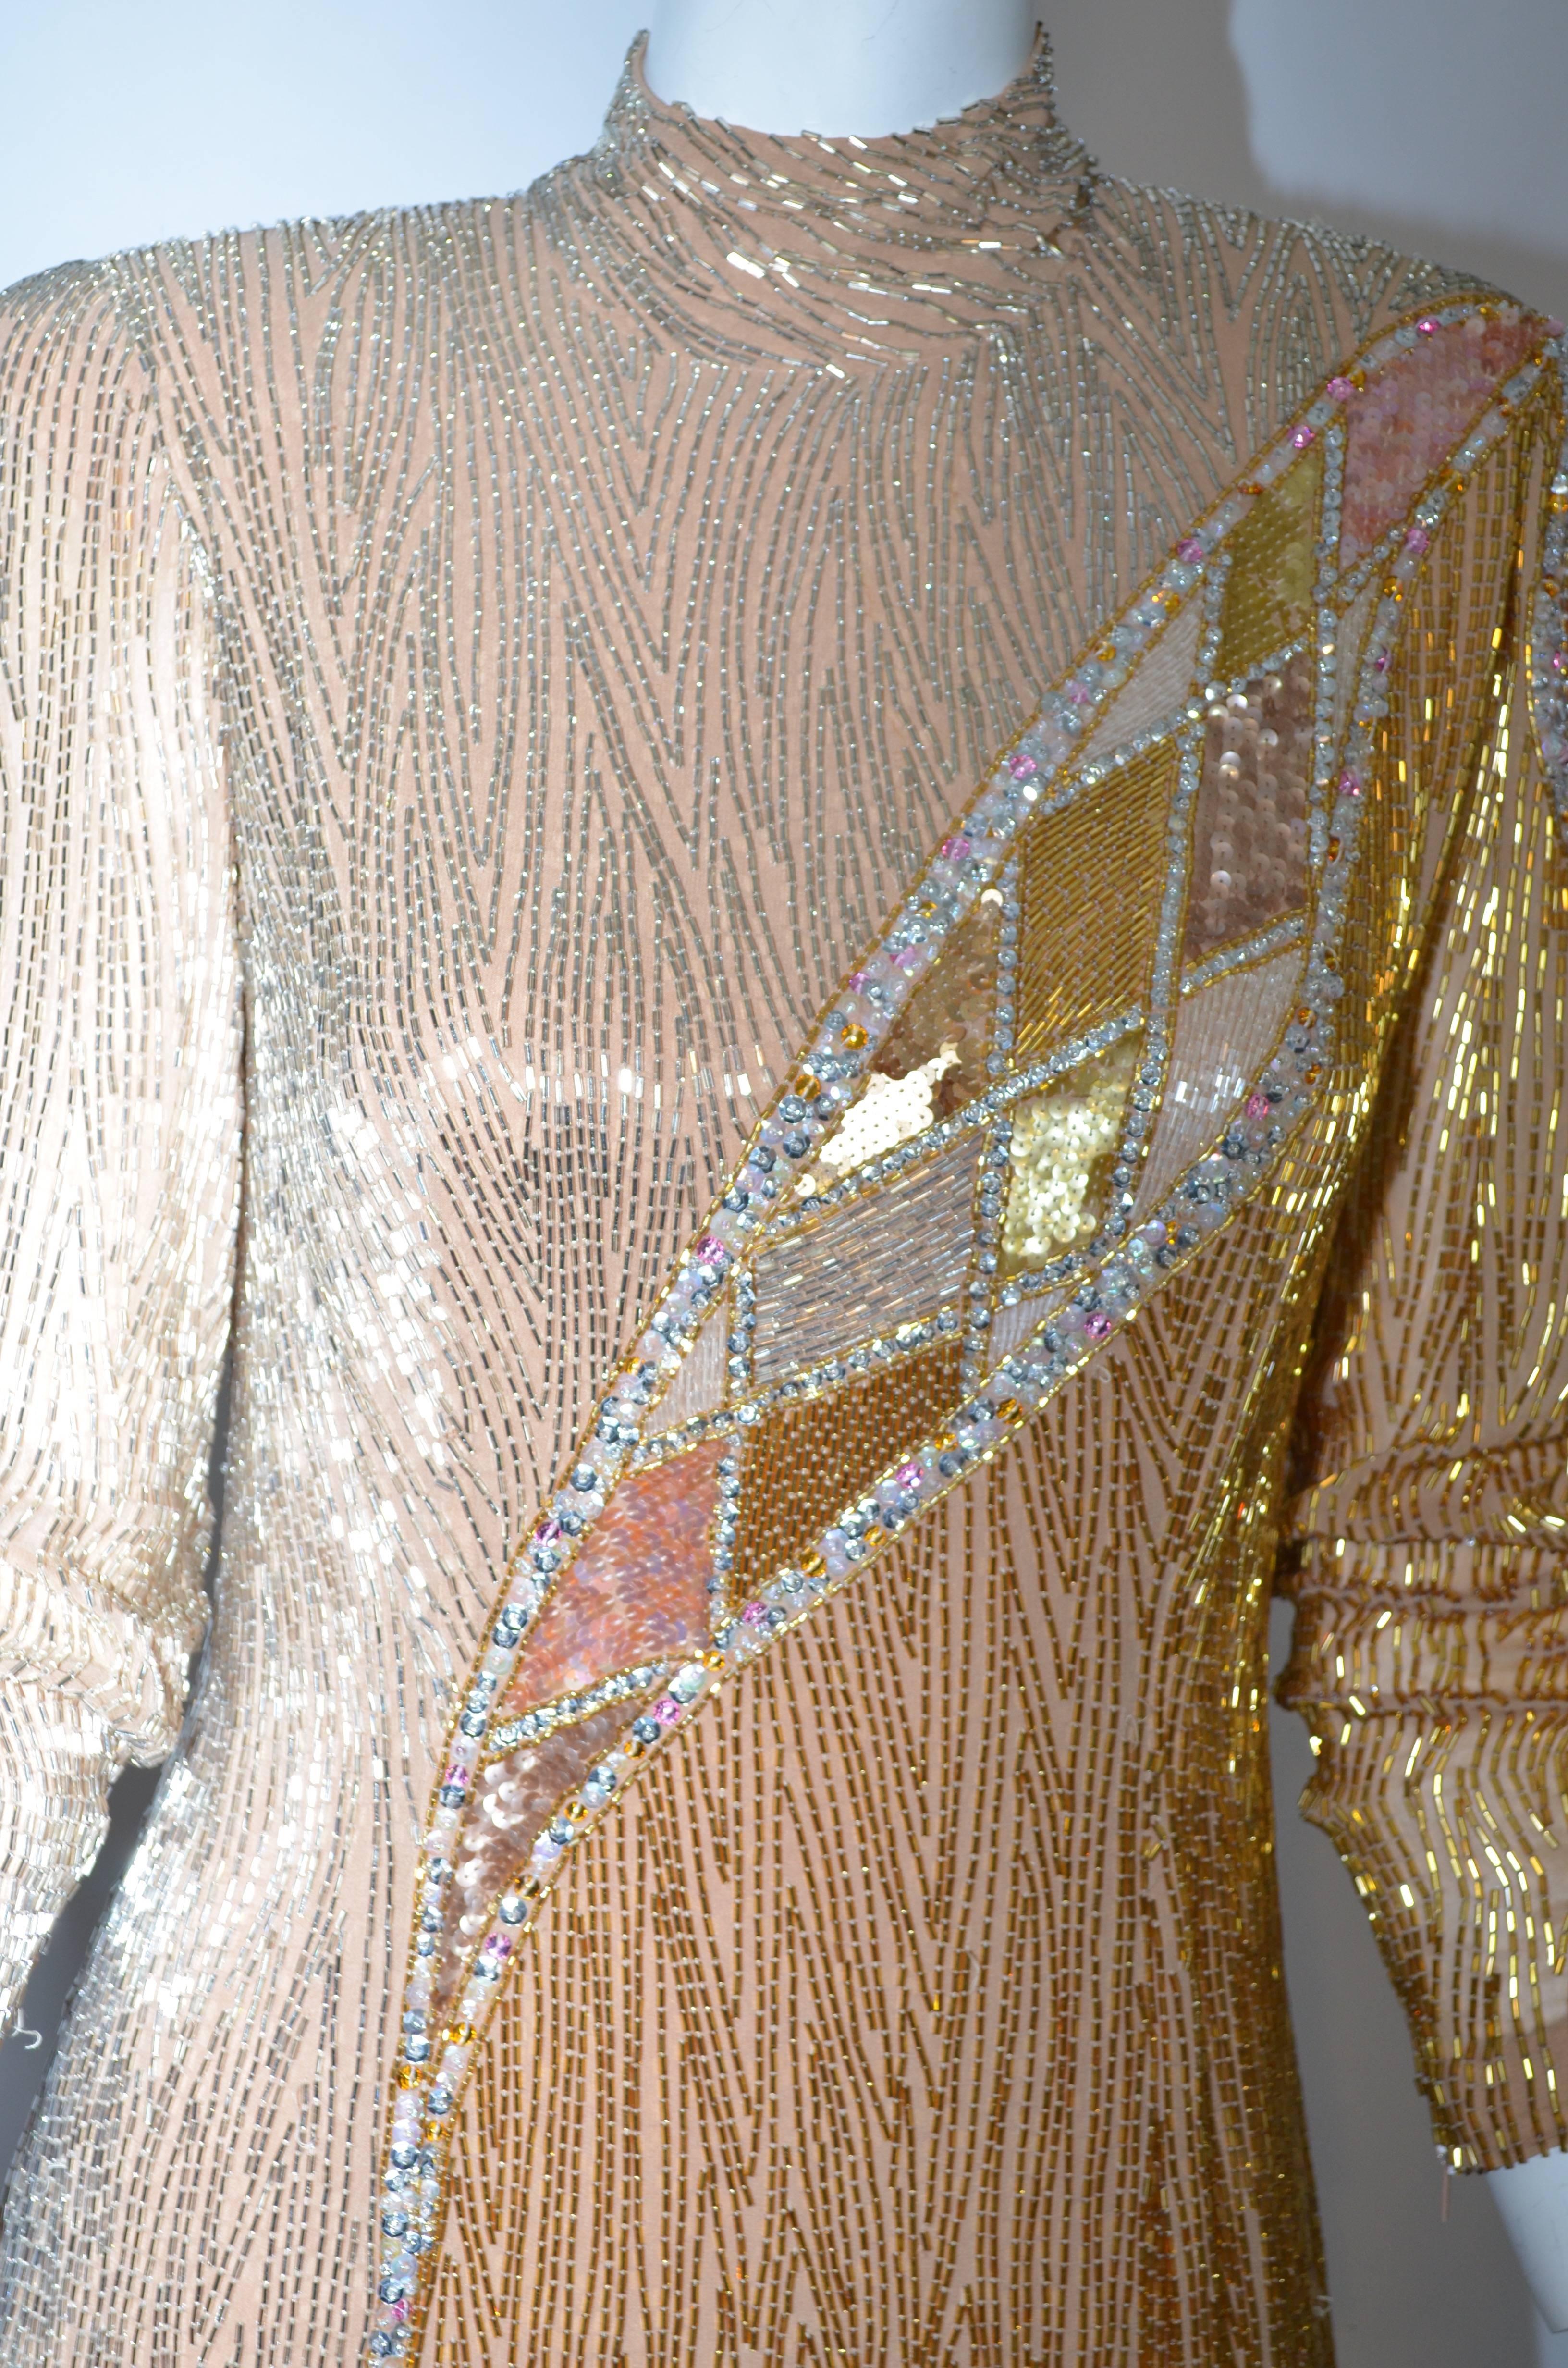 Exquisite Bob Mackie 1980's gold fringe beaded dress with hi-lo hem and 3-4 inch fringe on the lower 16 inches of the dress. Silver and gold bugle beads on nude silk chiffon with silver and pink sequins on design detail. Long fitted sleeve with